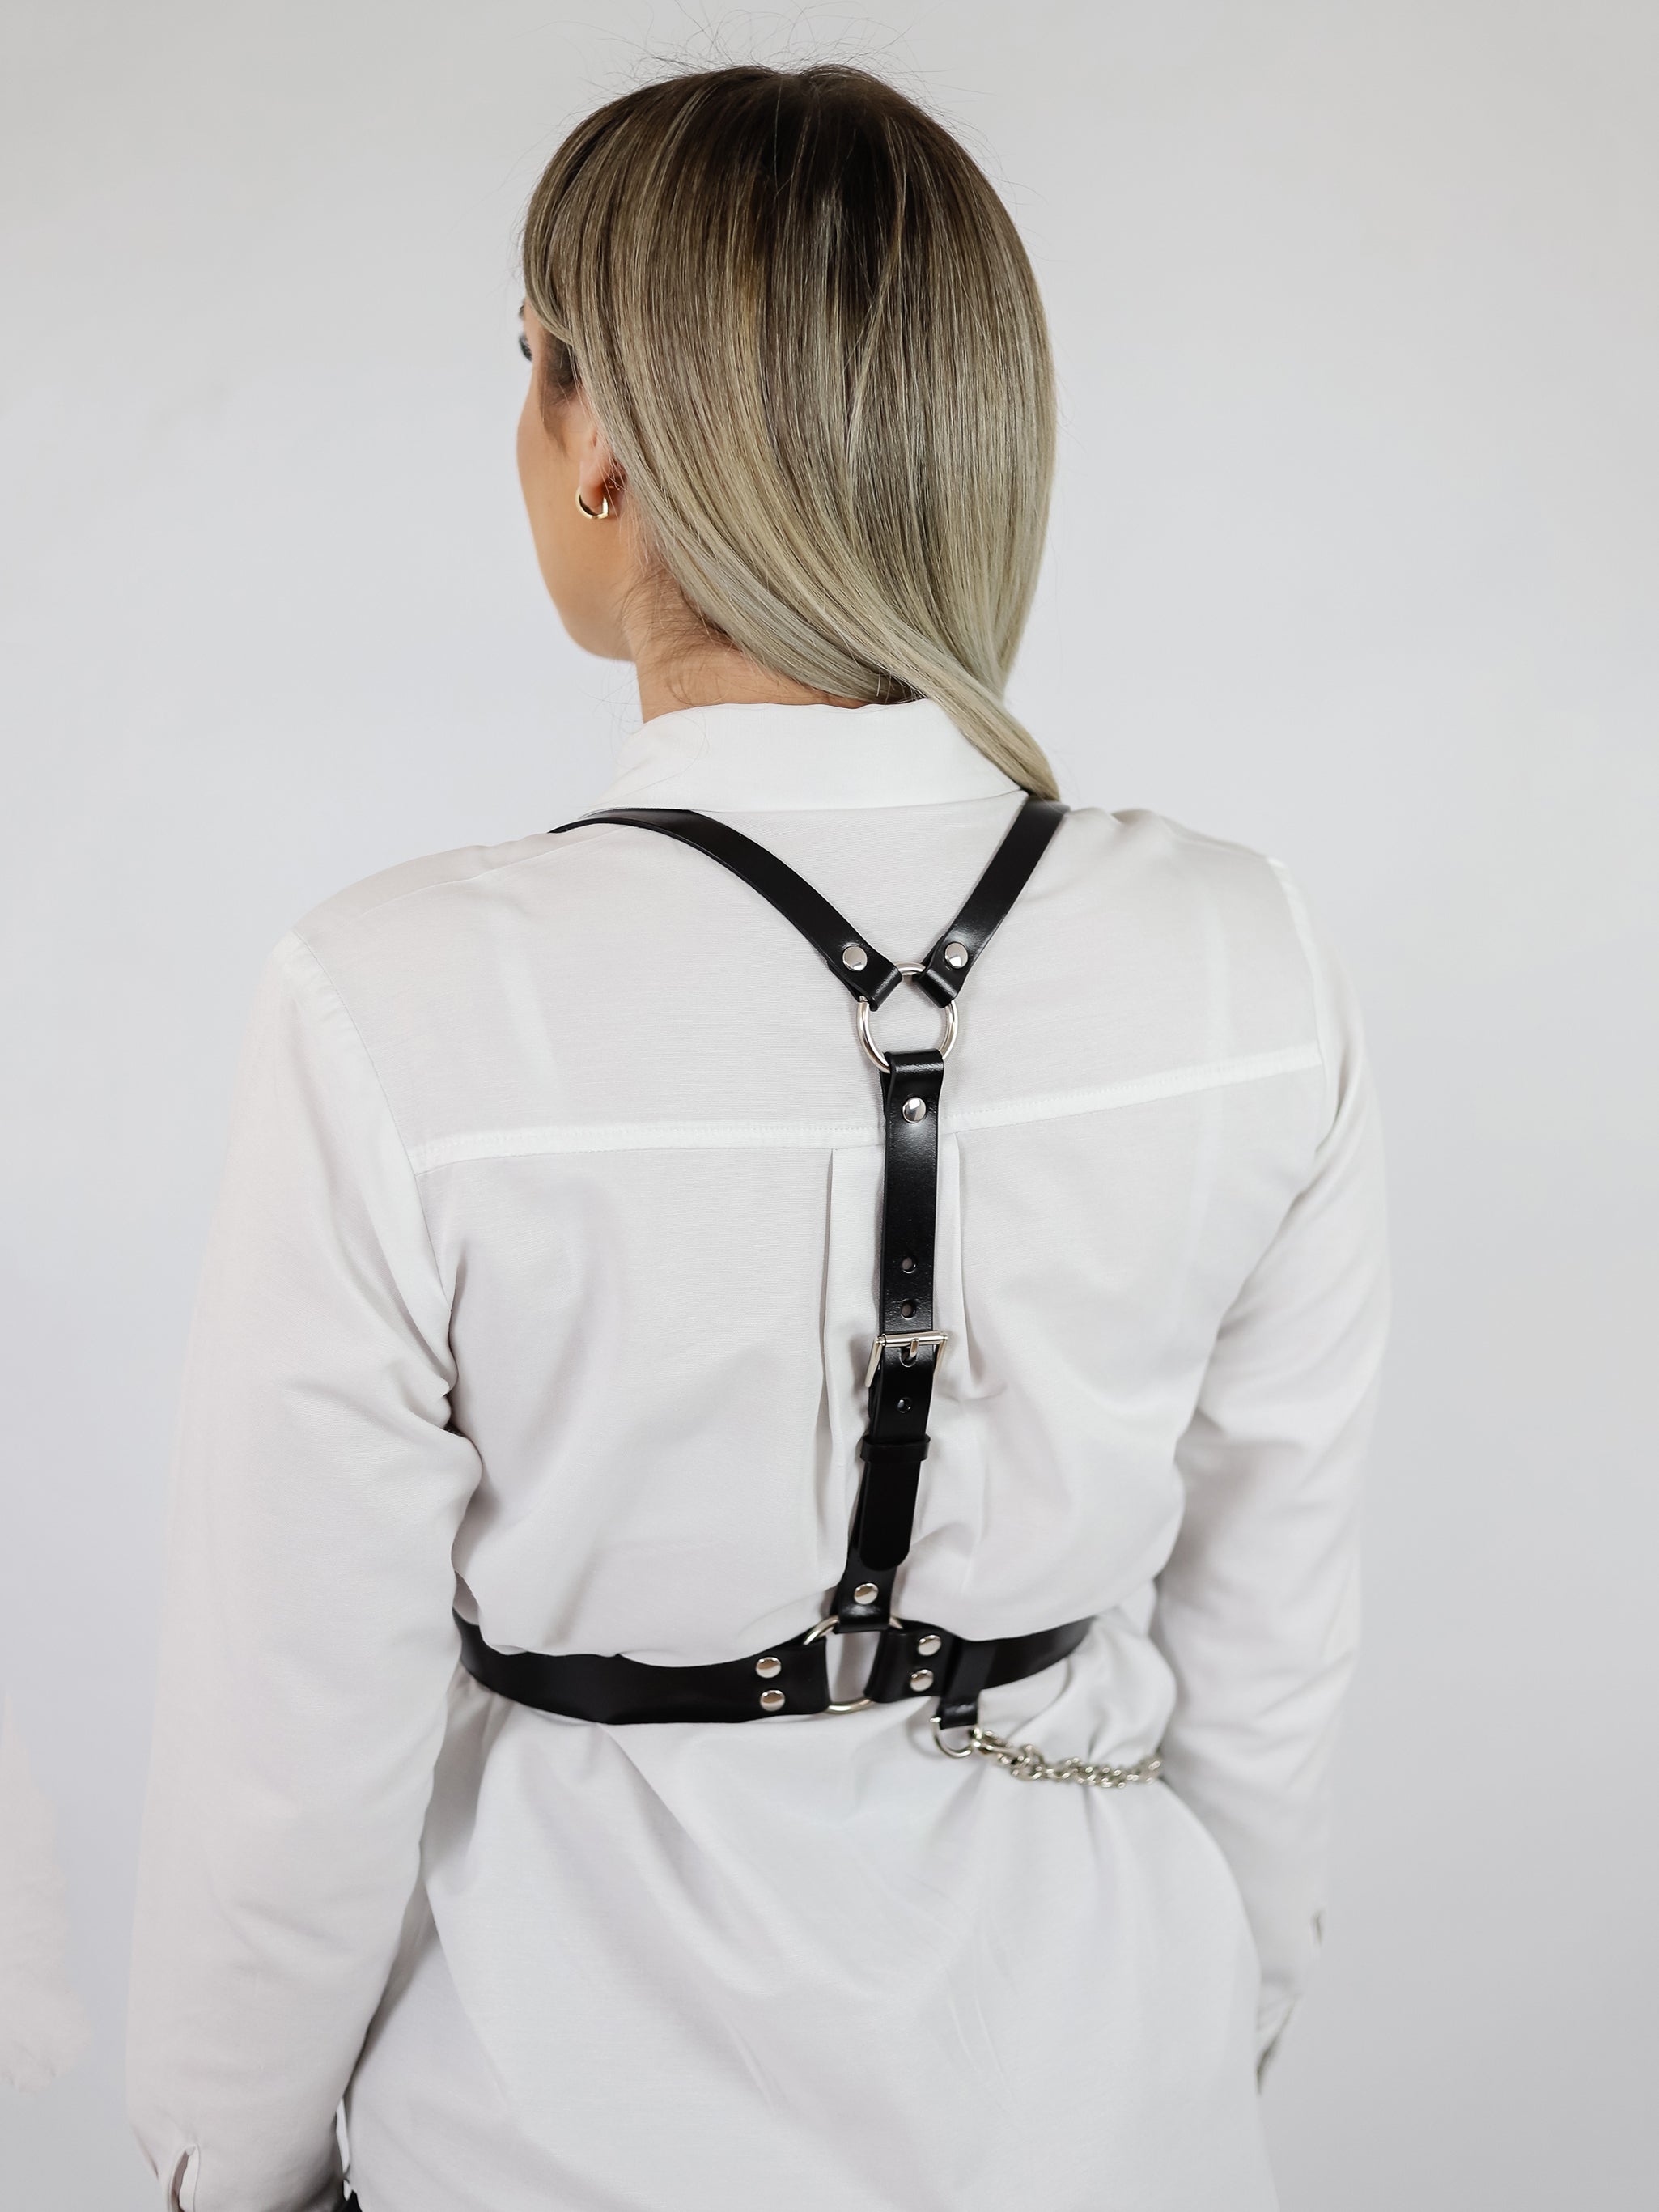 Leather Chain Harness, Fashion Body Harnesses